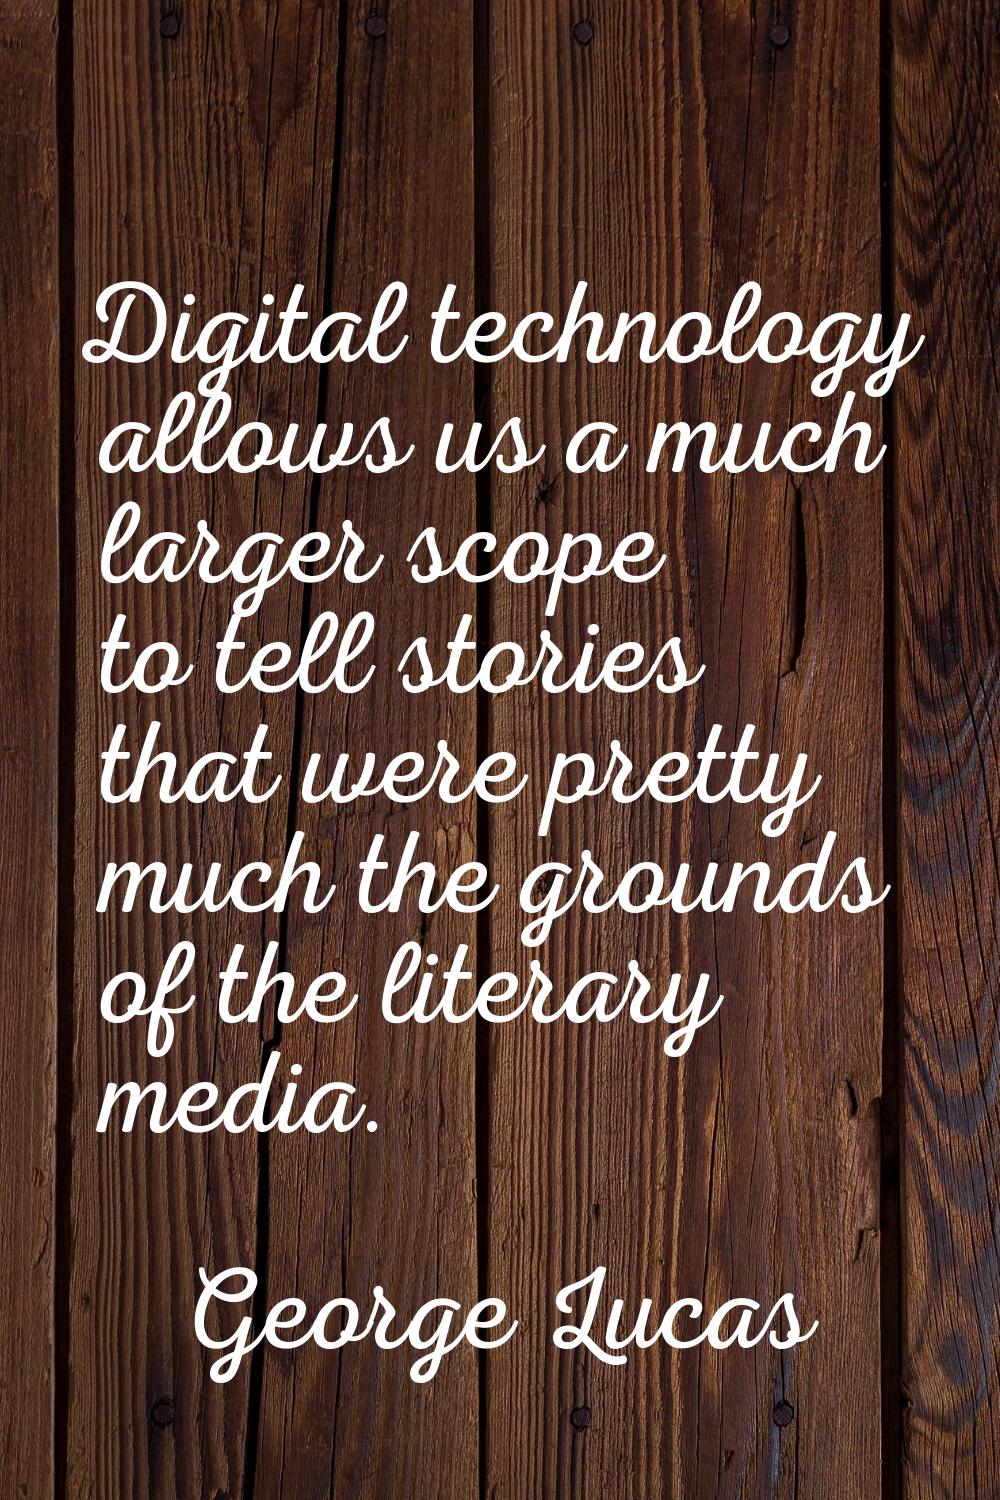 Digital technology allows us a much larger scope to tell stories that were pretty much the grounds 